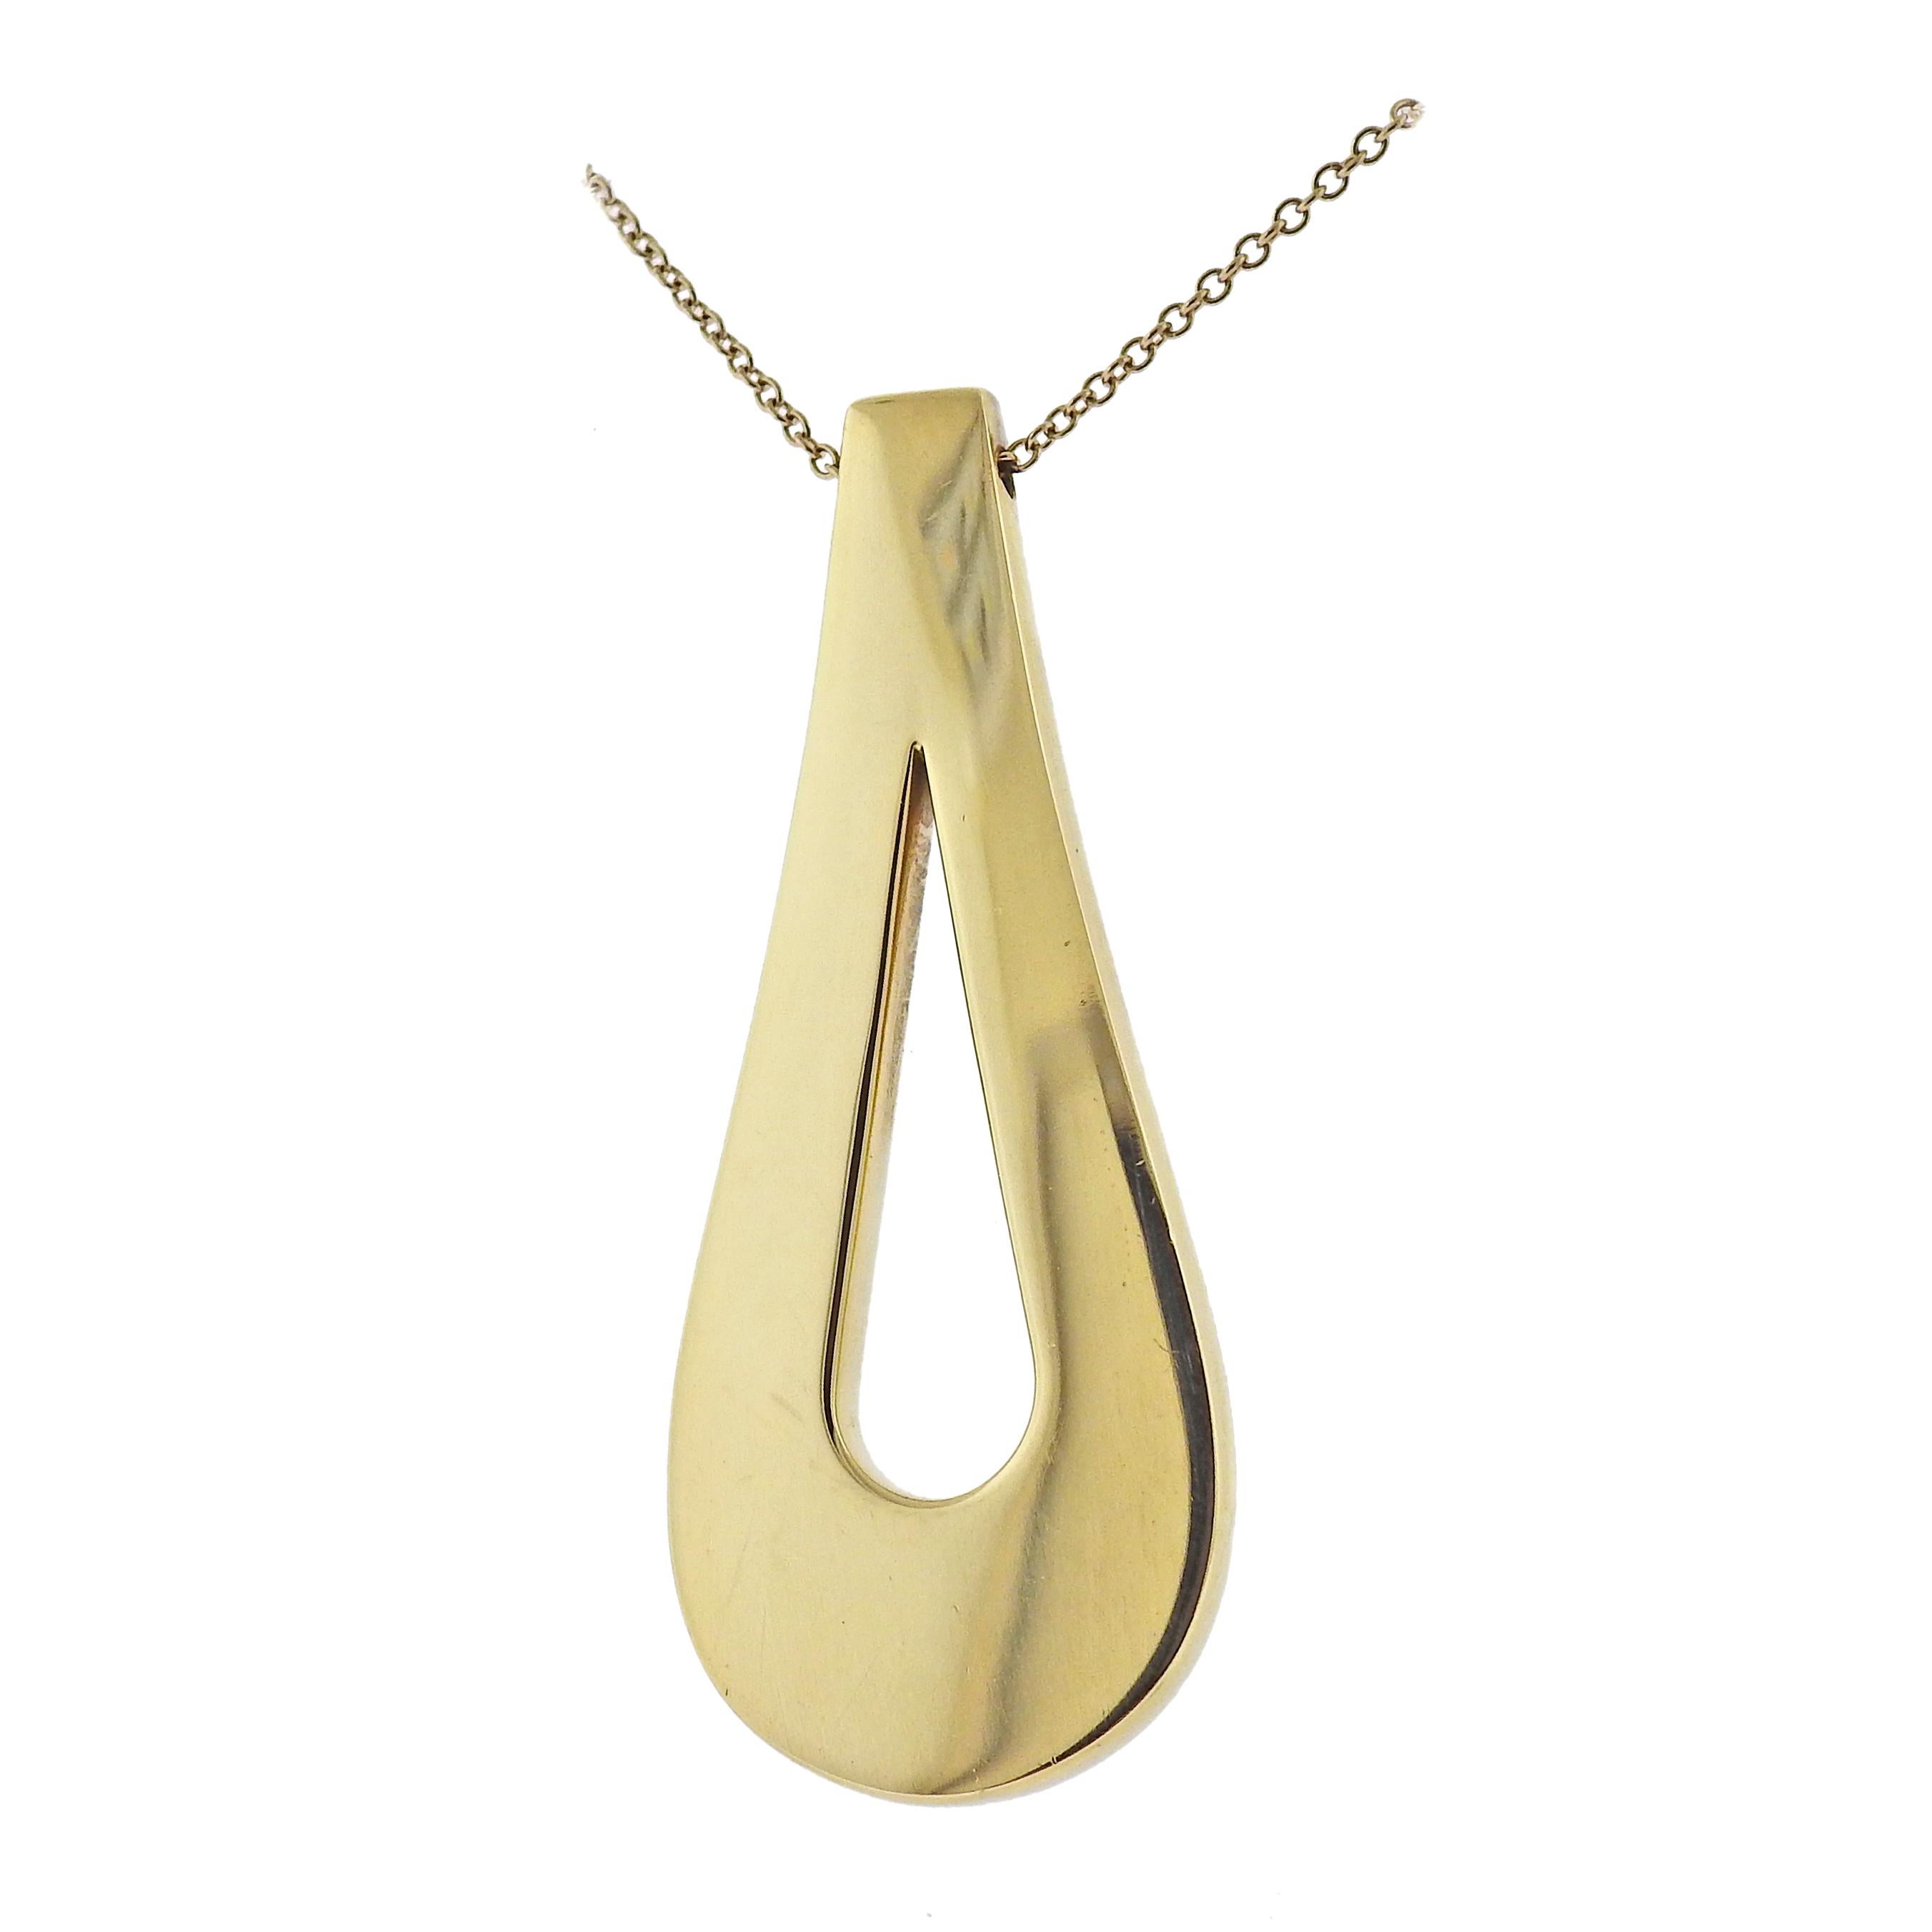 18k yellow gold teardrop pendant on a long chain necklace, by Tiffany & Co. Necklace is 30